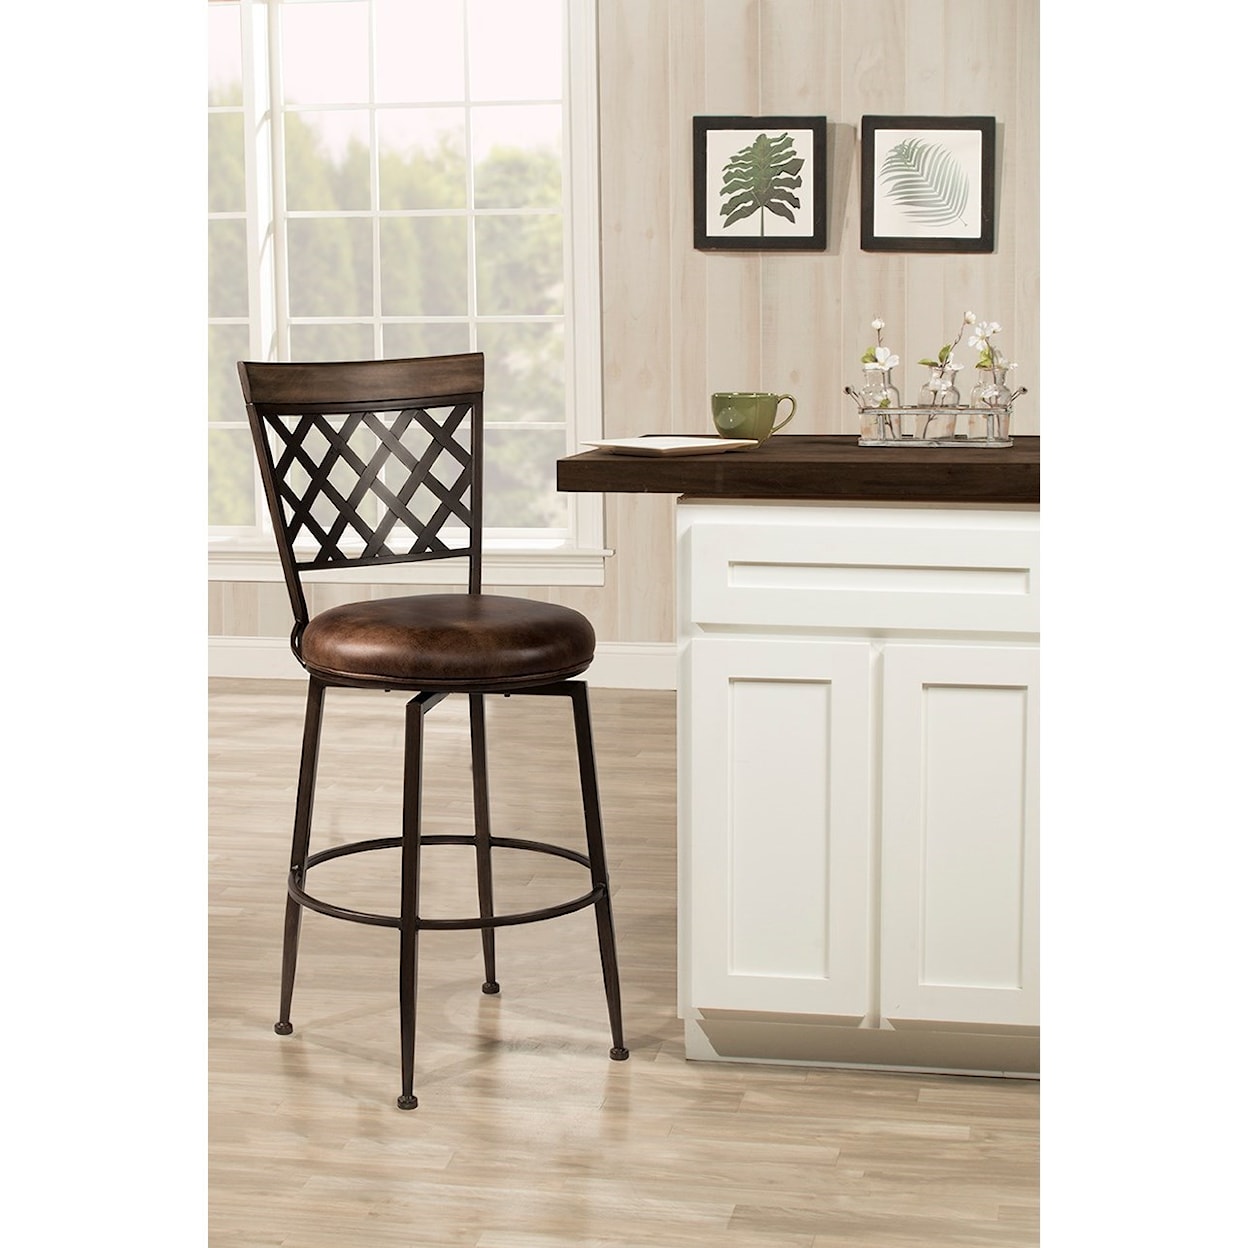 Hillsdale Greenfield Commercial Grade Stools Swivel Bar Stool